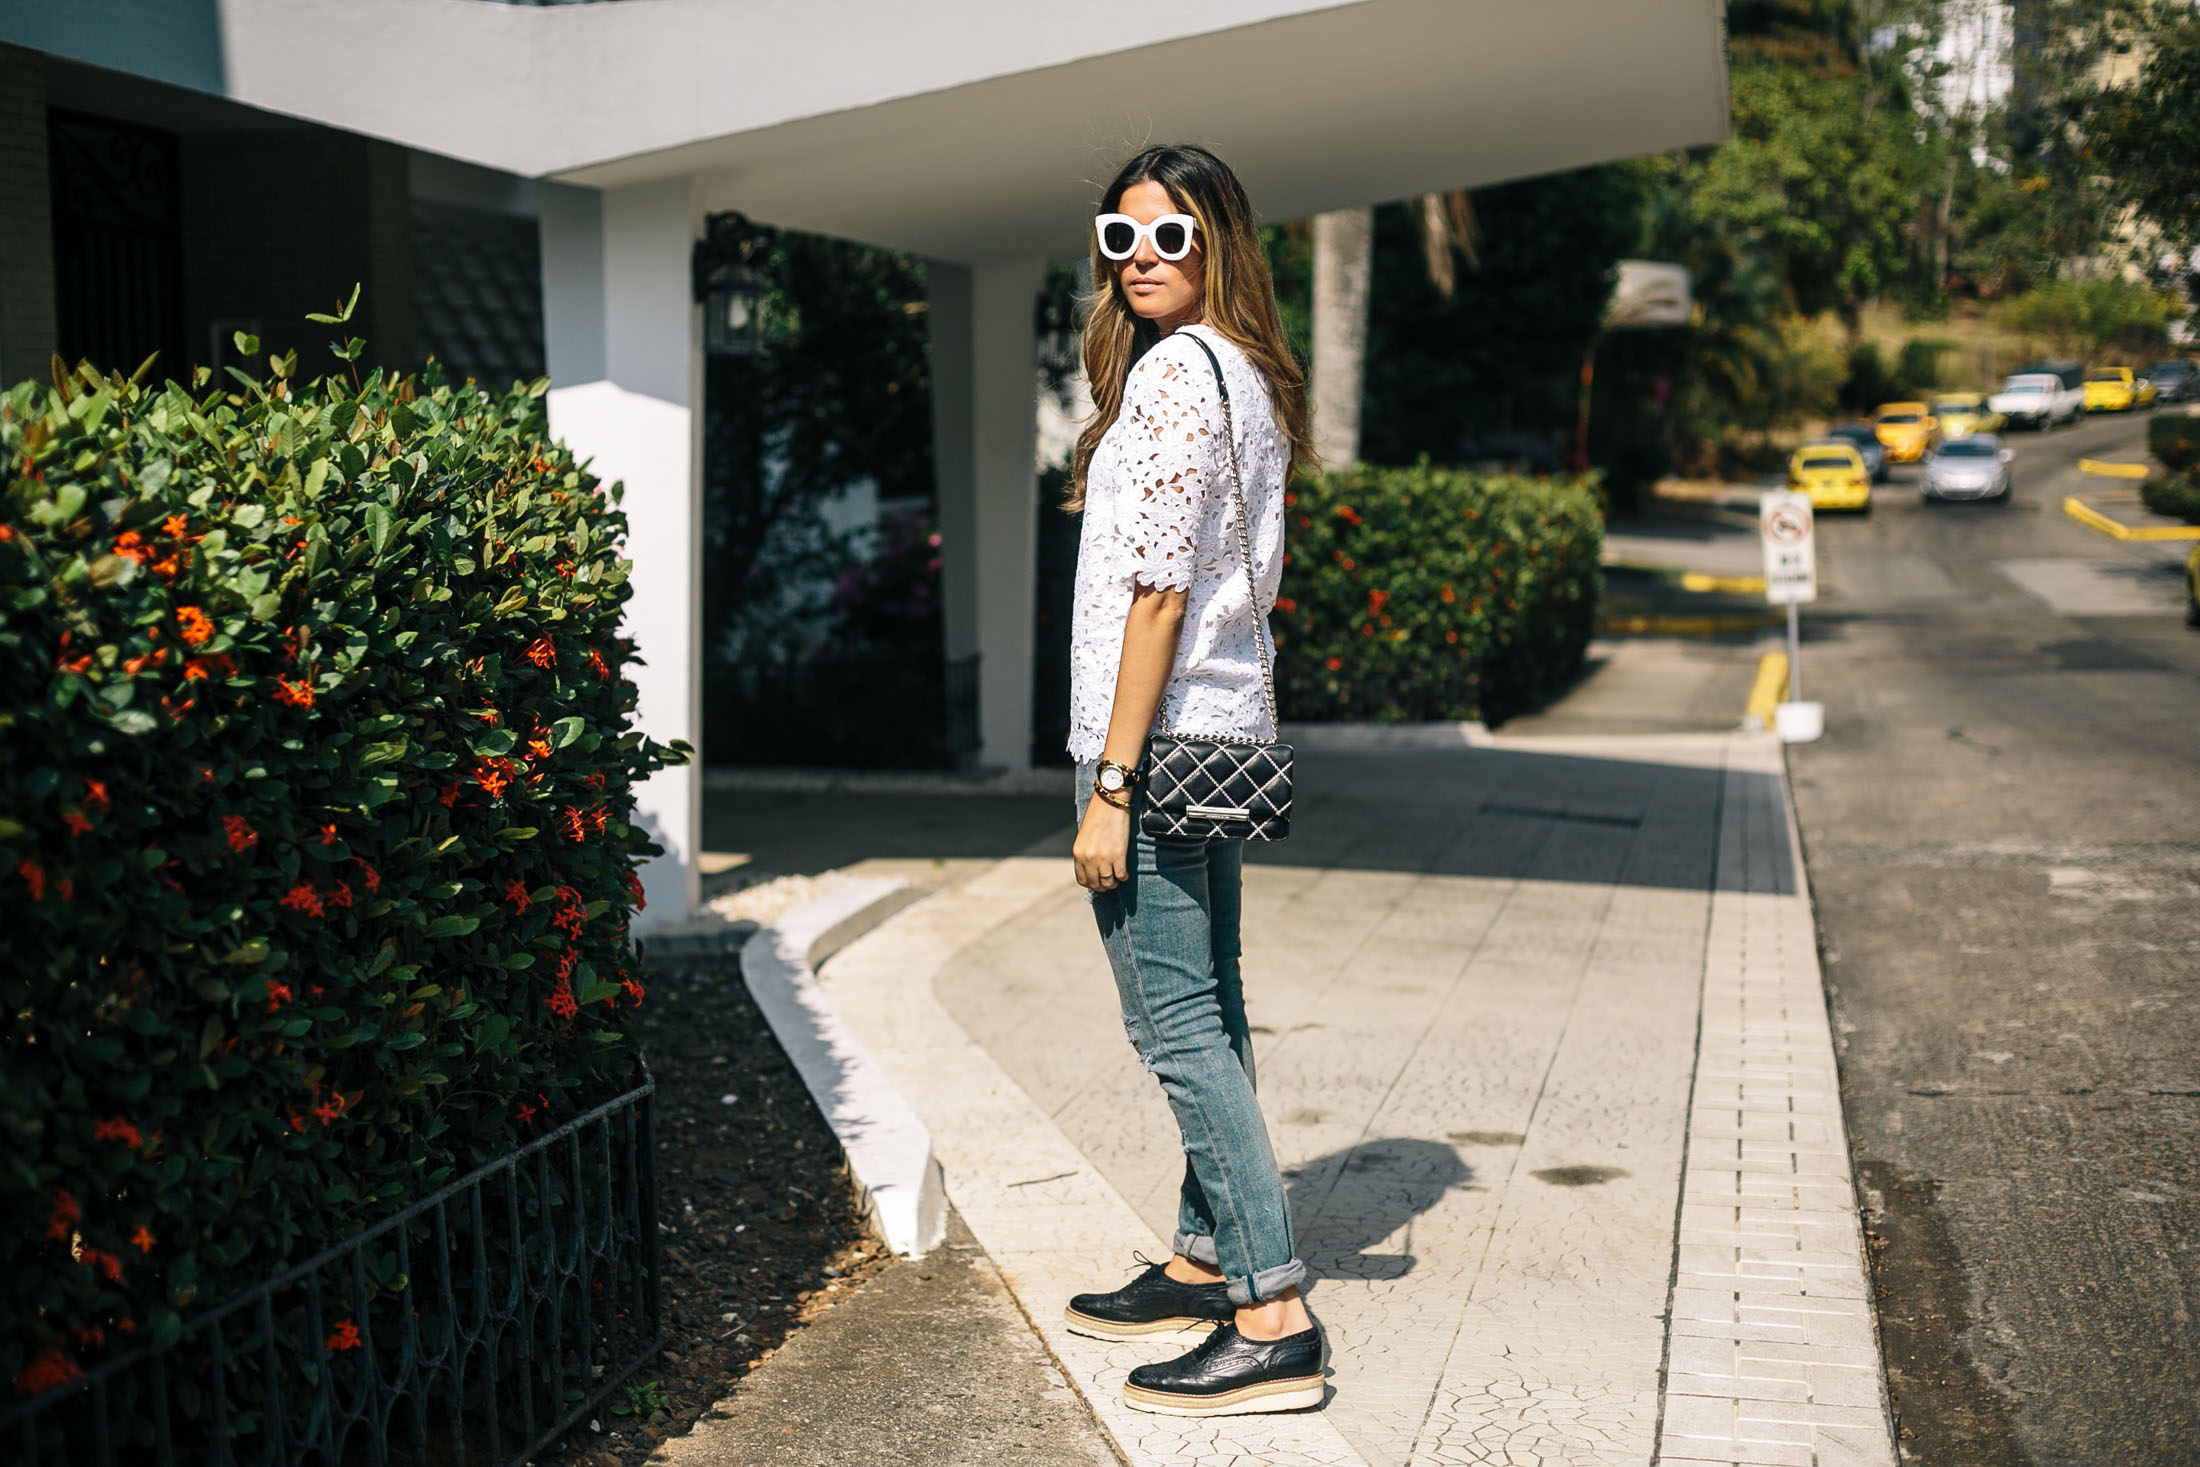 Mixing graphic details with girly lace, denim and menswear shoes